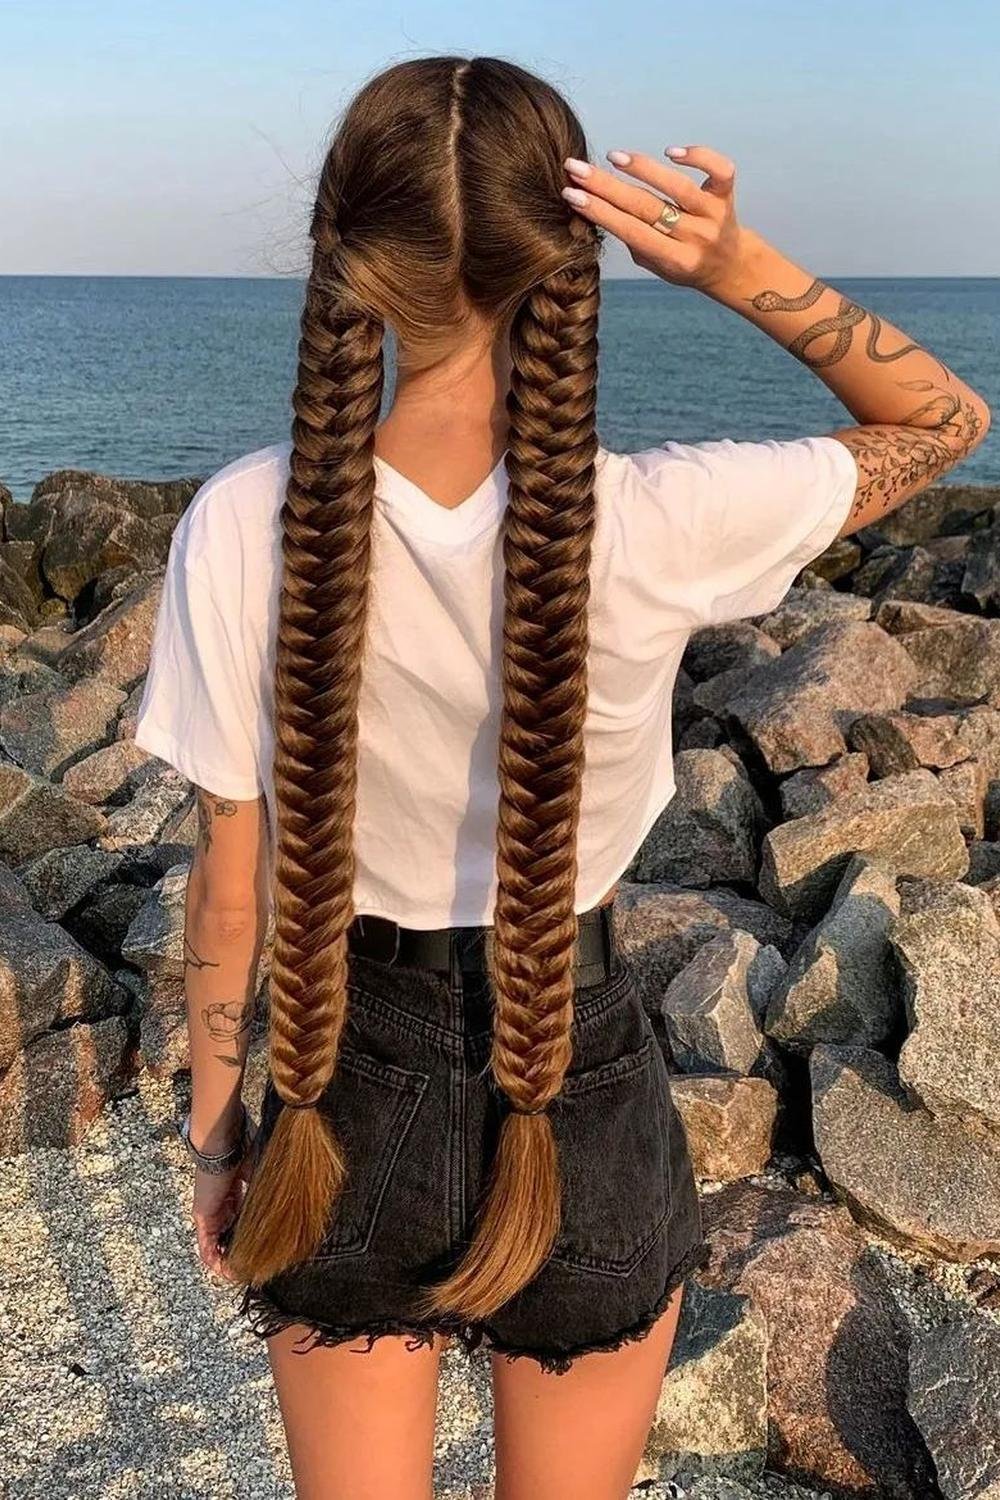 20 - Picture of Braided Hairstyles